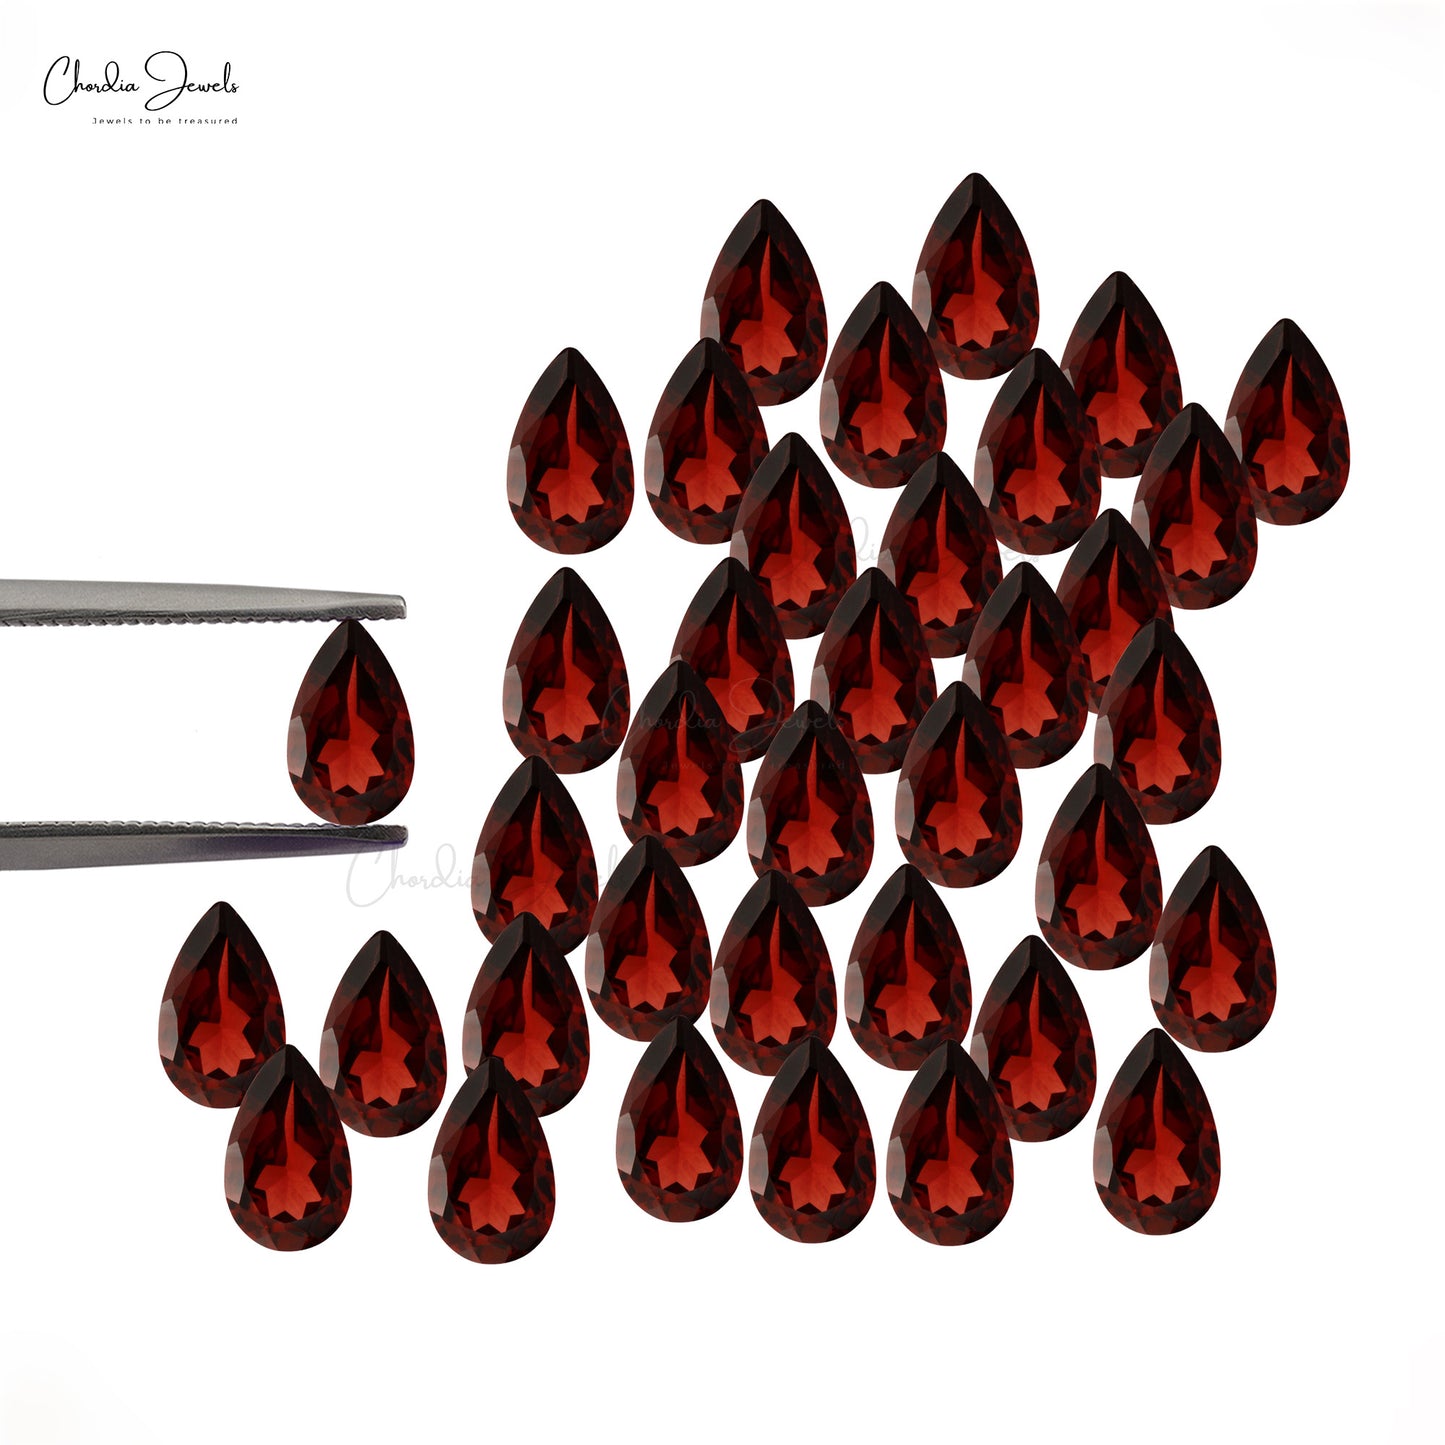 AAA Fine Quality 100% Natural Faceted Garnet 8X5MM for Wholesale, 1 Piece